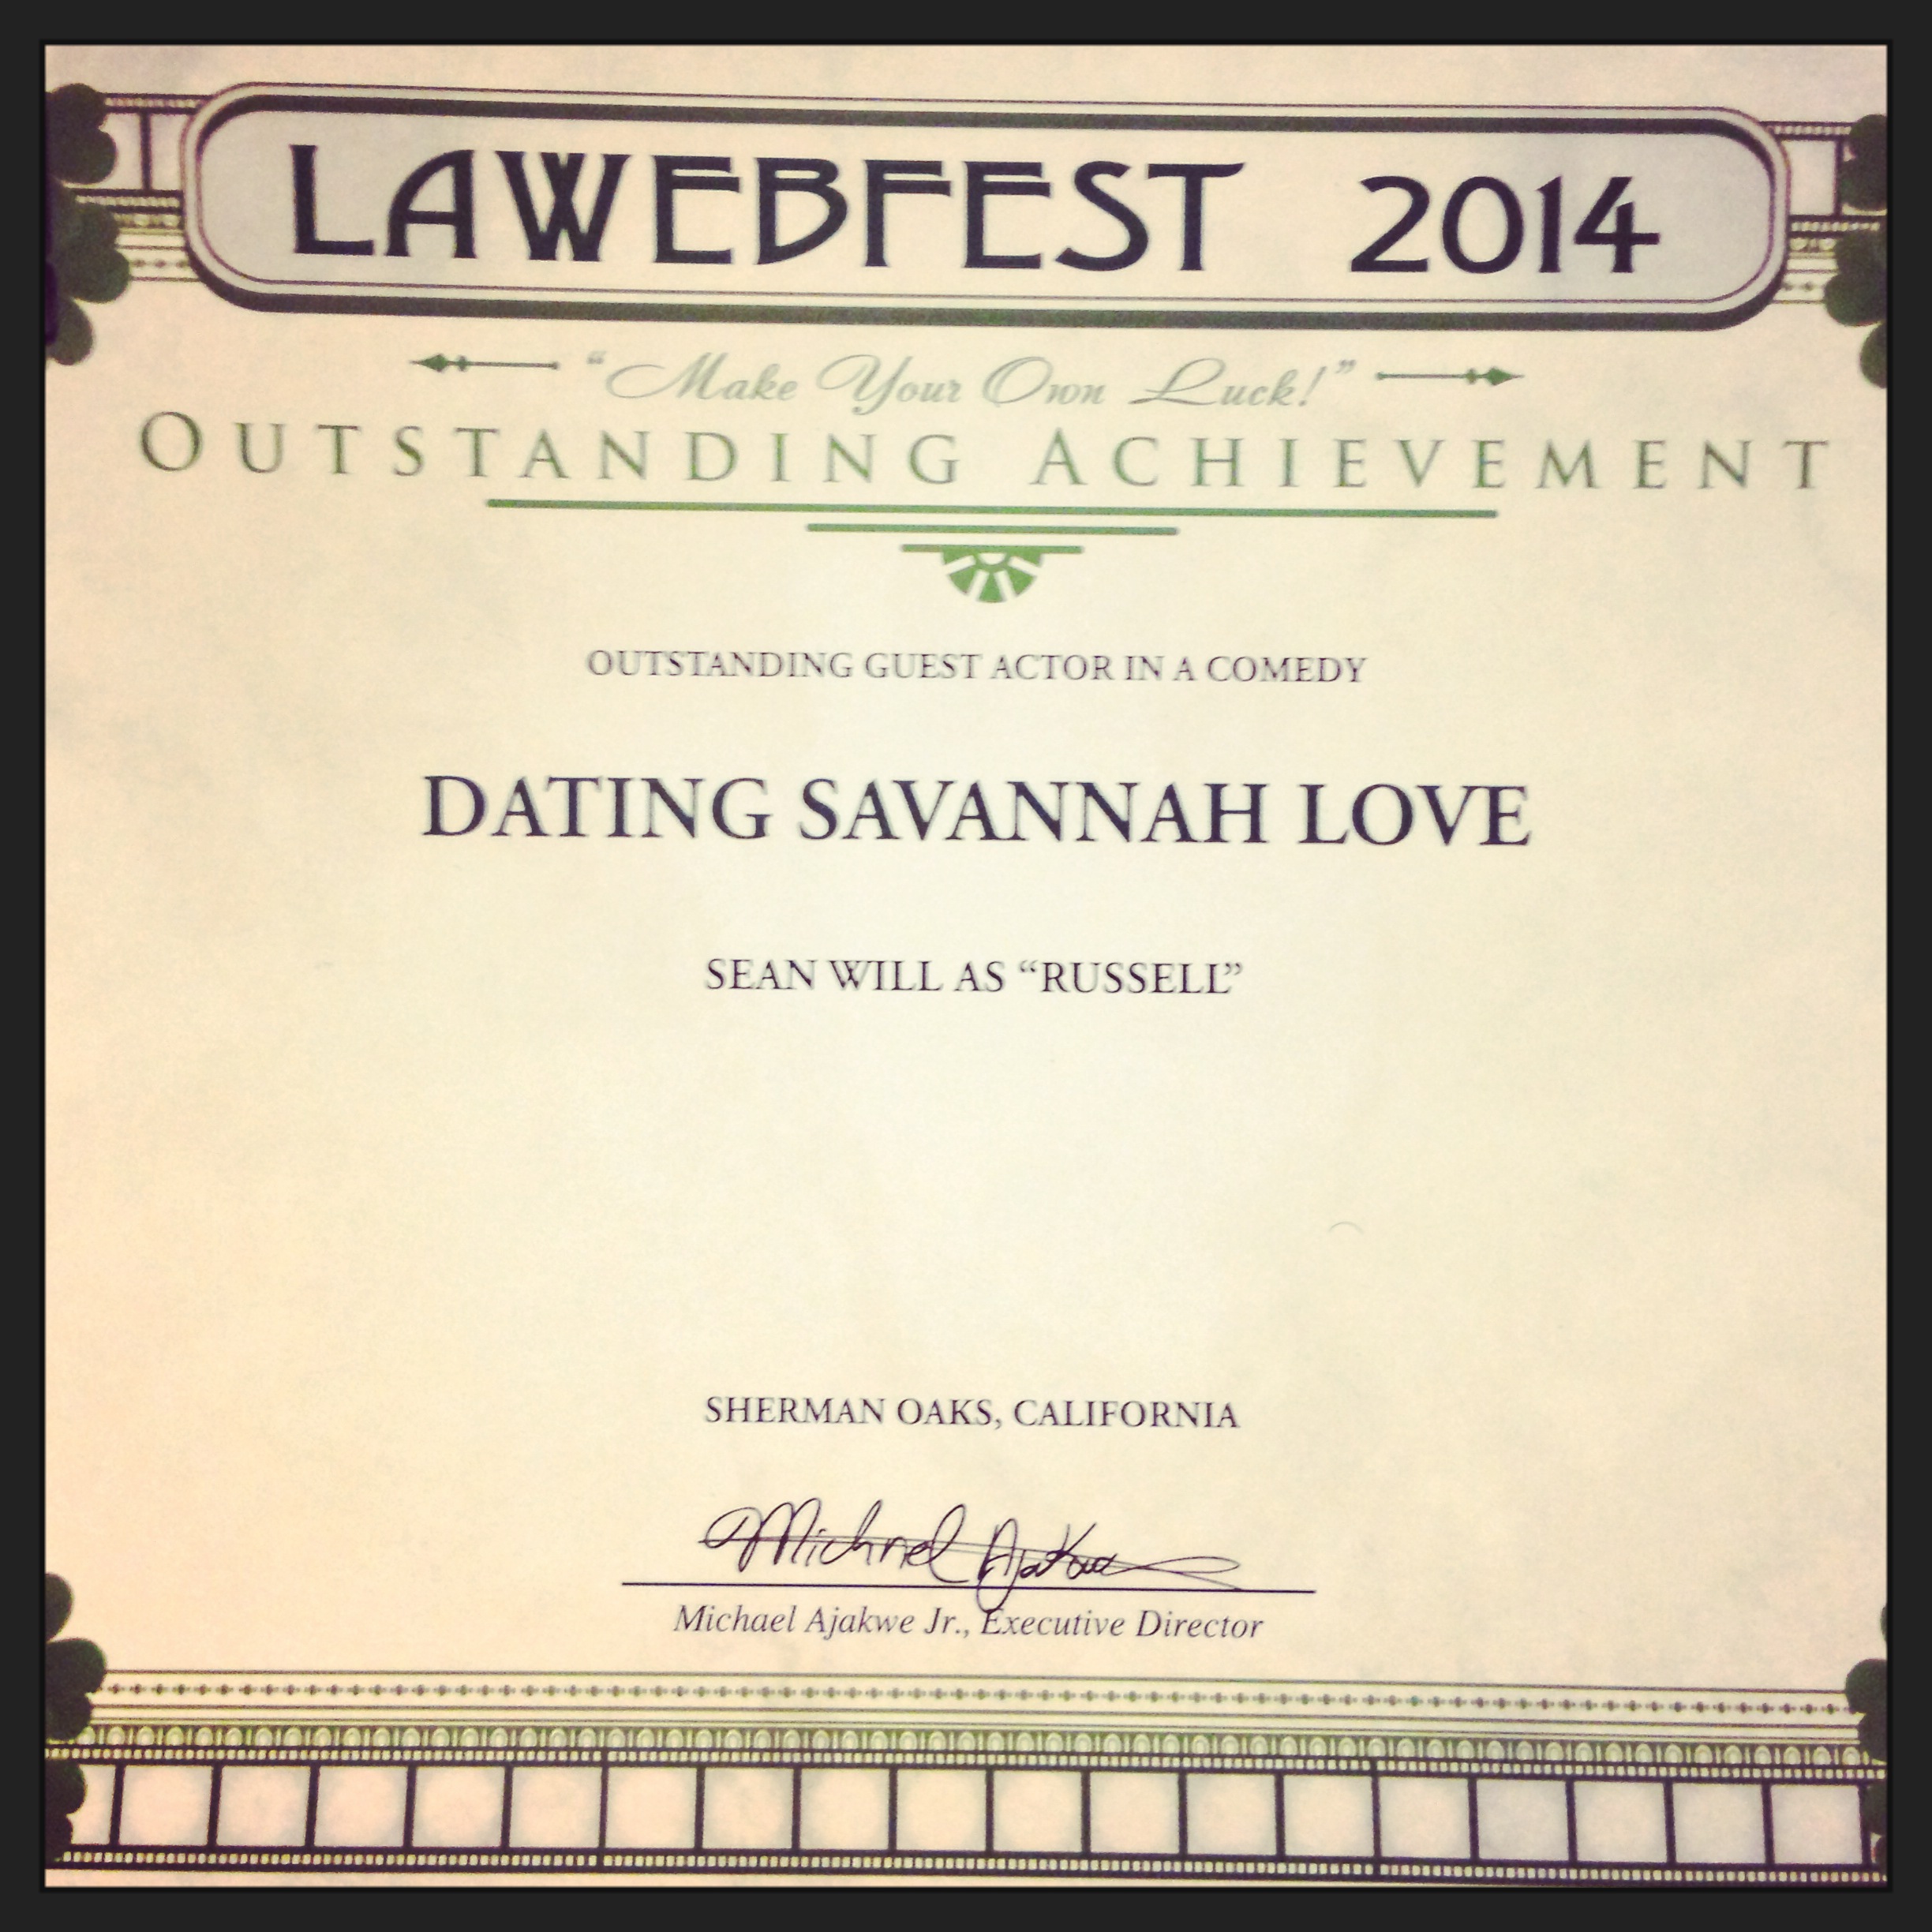 Voted Outstanding Guest Actor in a Comedy at LA WebFest 2014.